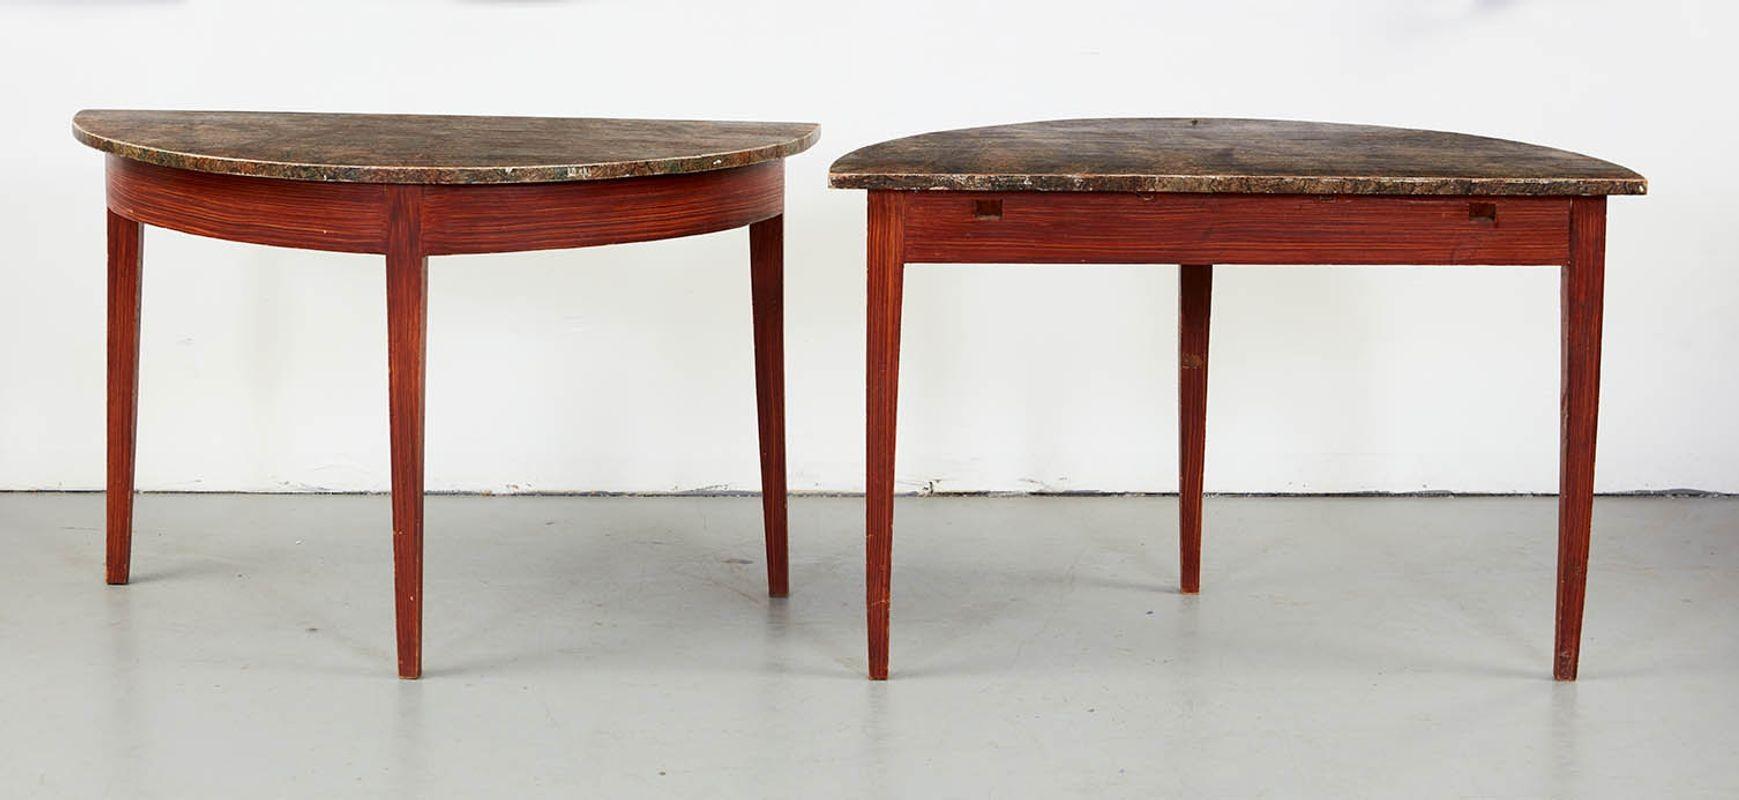 Pair of Faux Painted Swedish Demilune Tables In Good Condition For Sale In Greenwich, CT